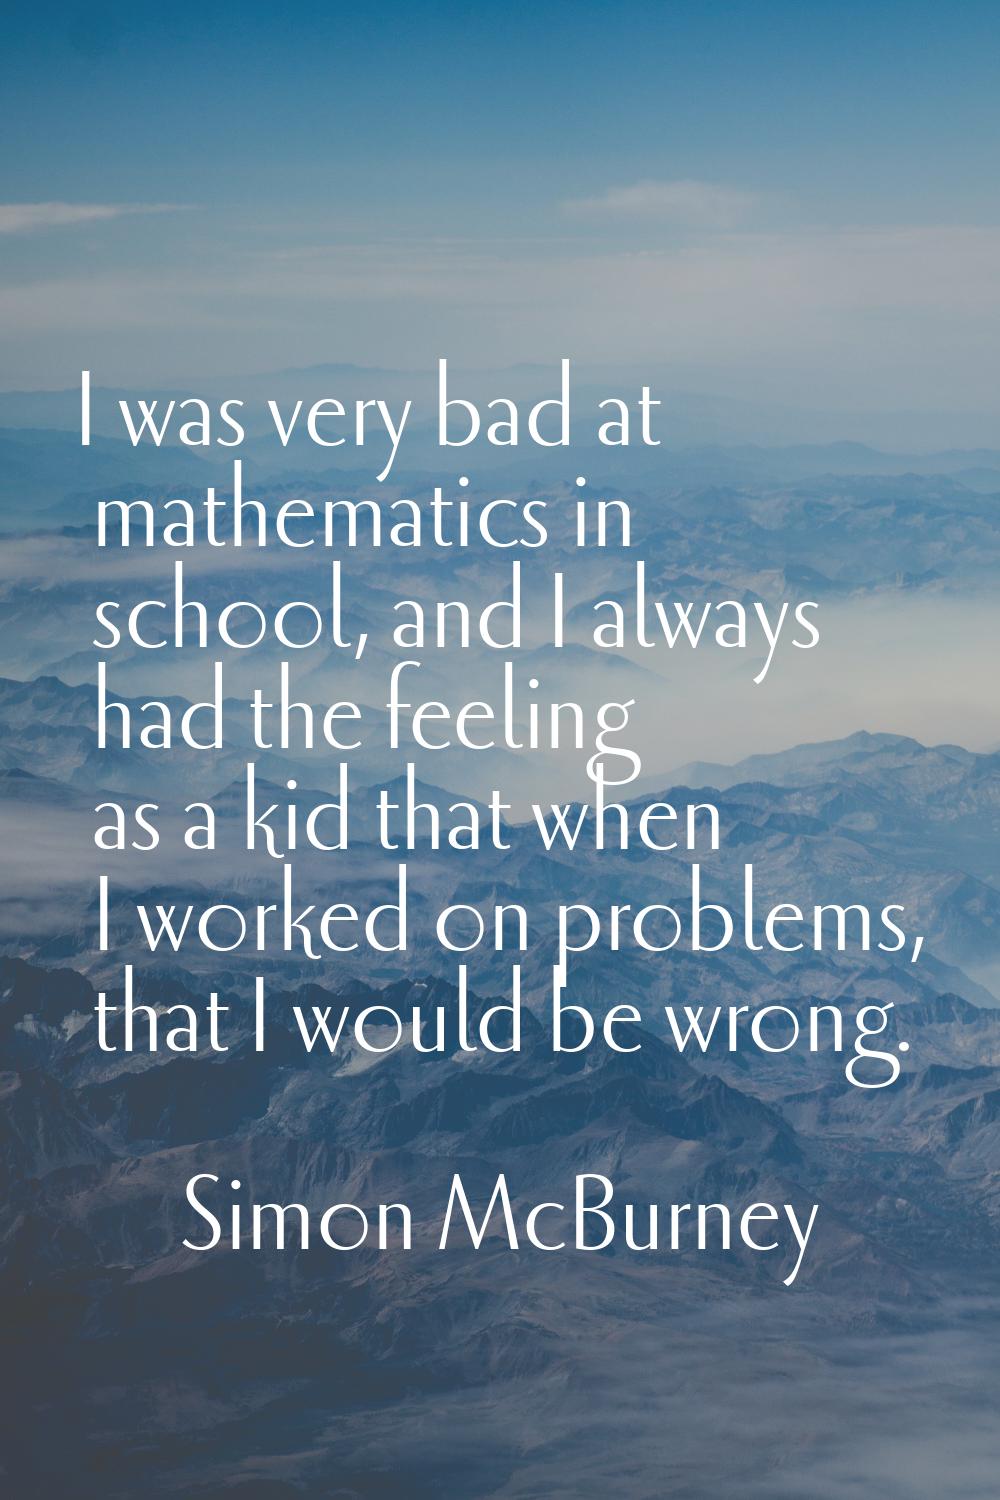 I was very bad at mathematics in school, and I always had the feeling as a kid that when I worked o